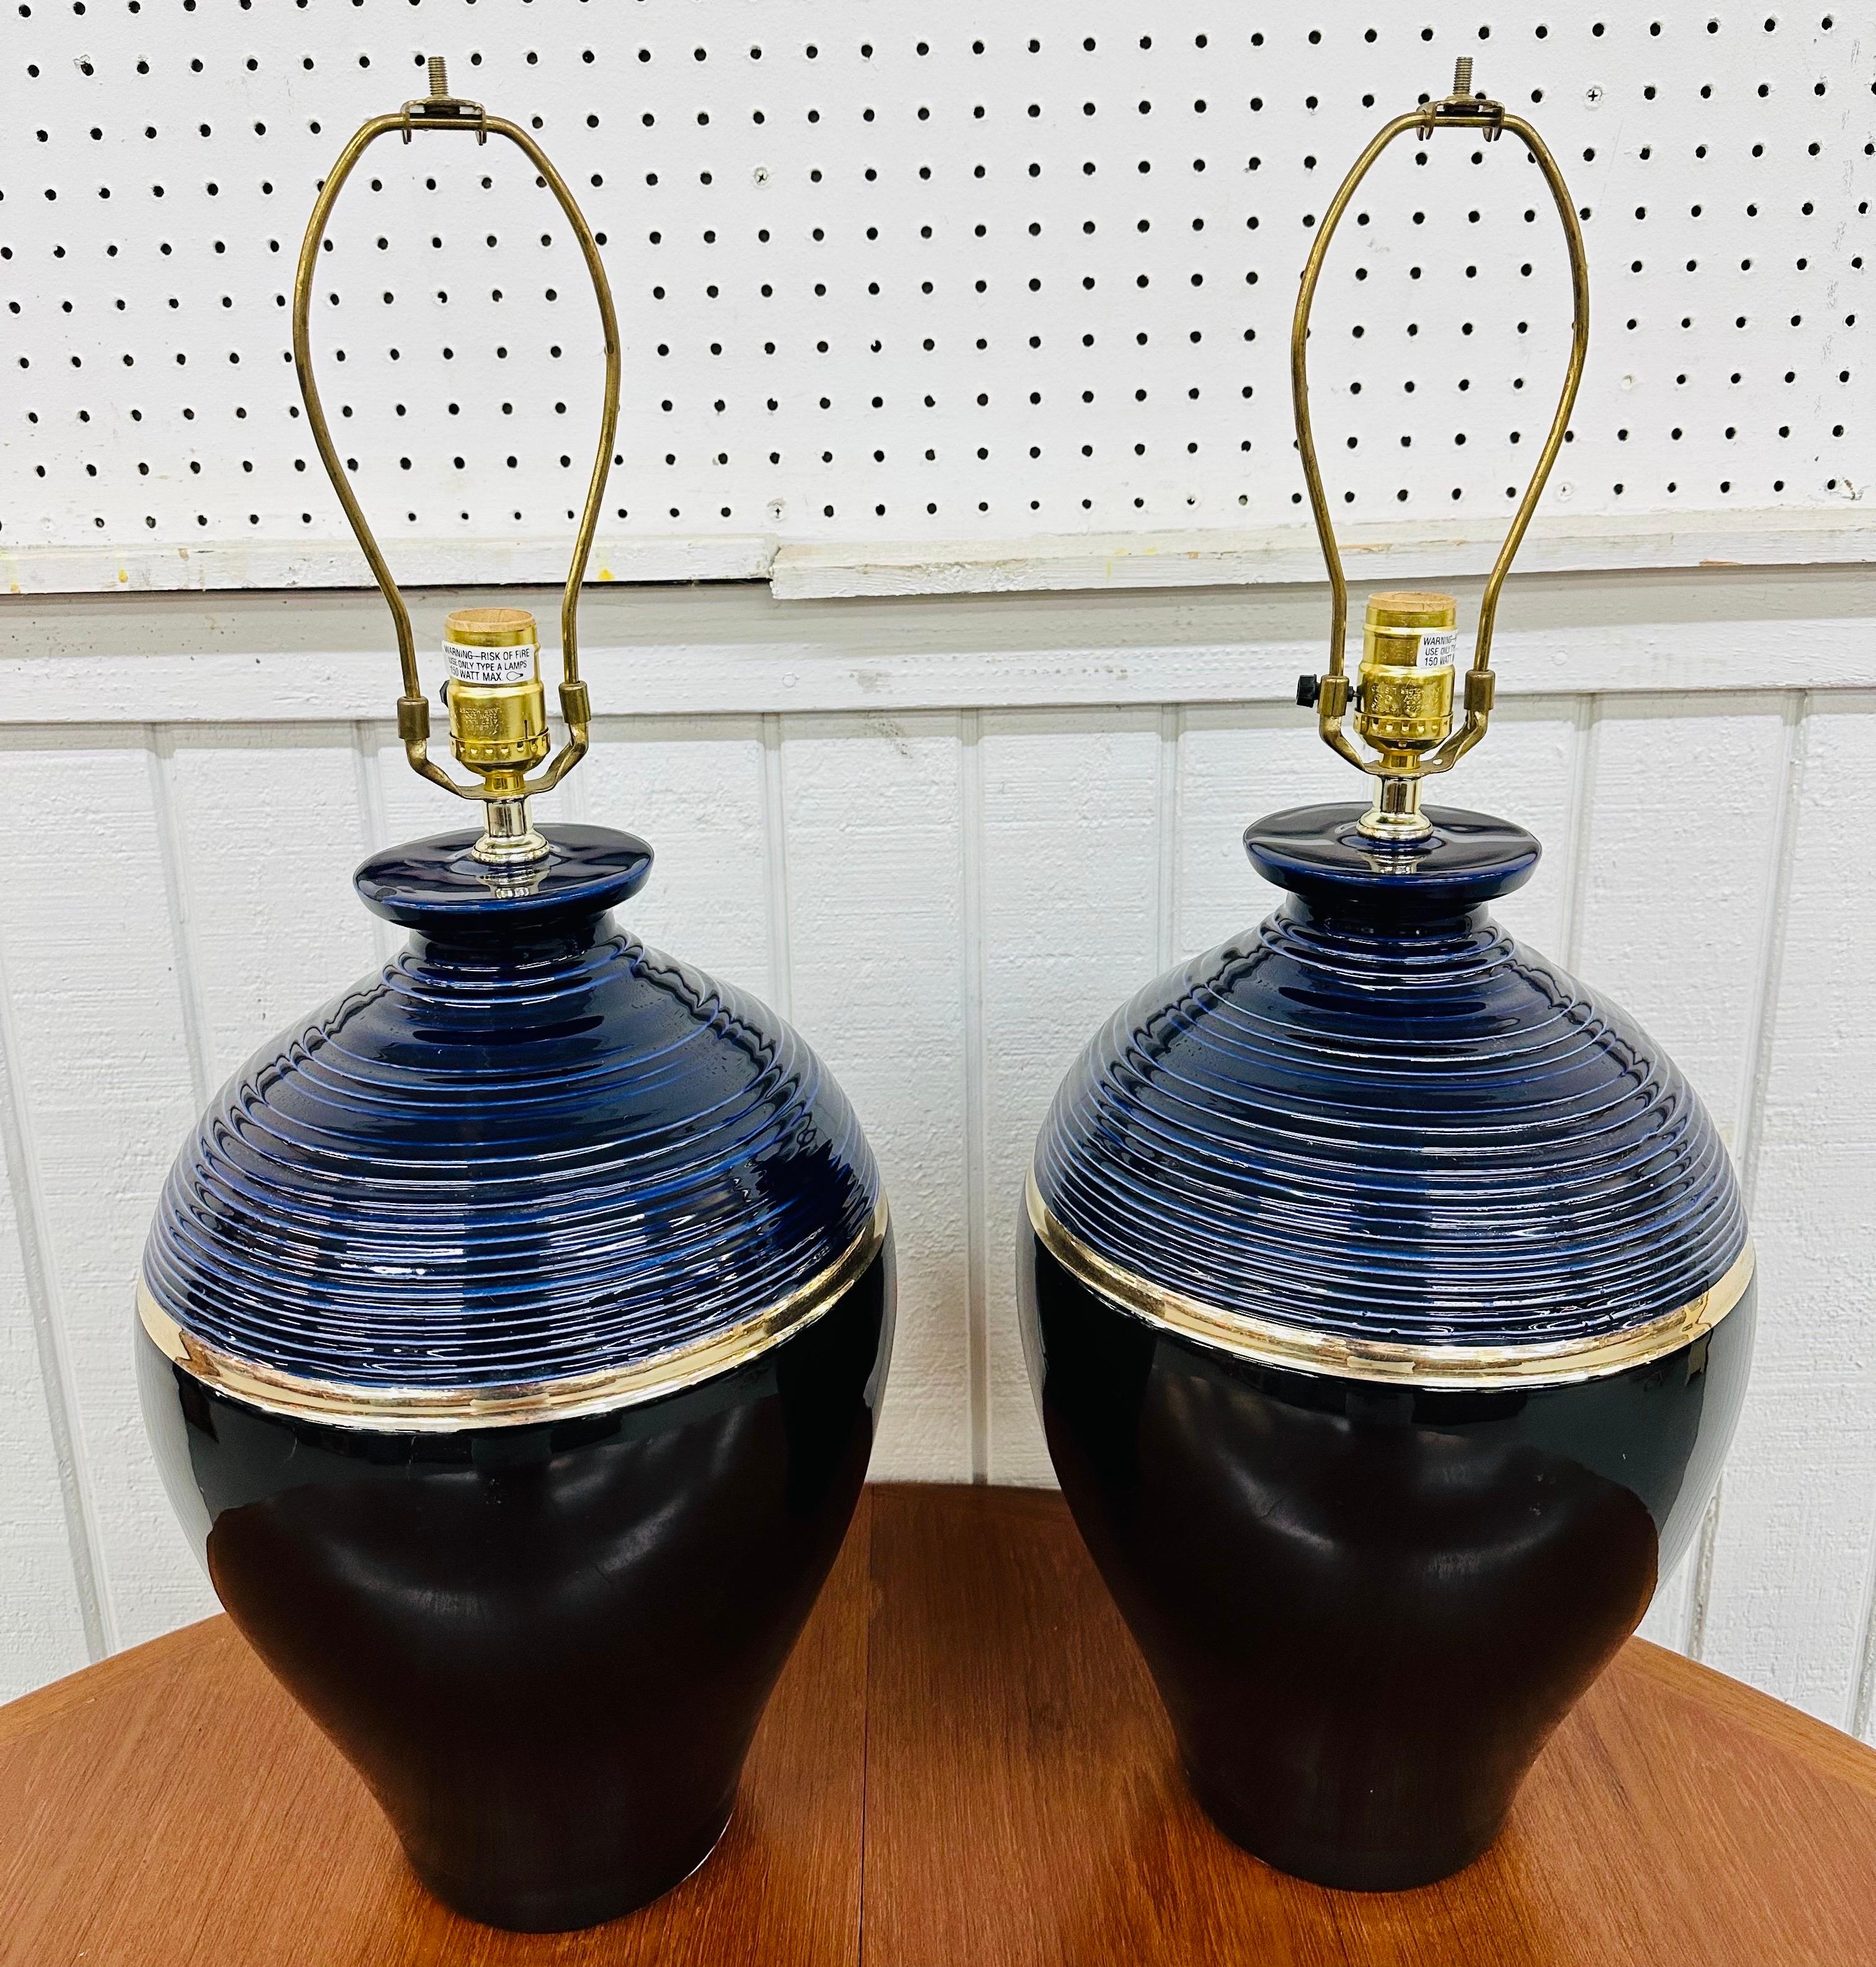 This listing is for a pair of Post-Modern Ceramic Table Lamps. Featuring a black, navy blue, and gold body, brass necks and harps, and original shades. This is an exceptional combination of quality and design from the 1980’s!